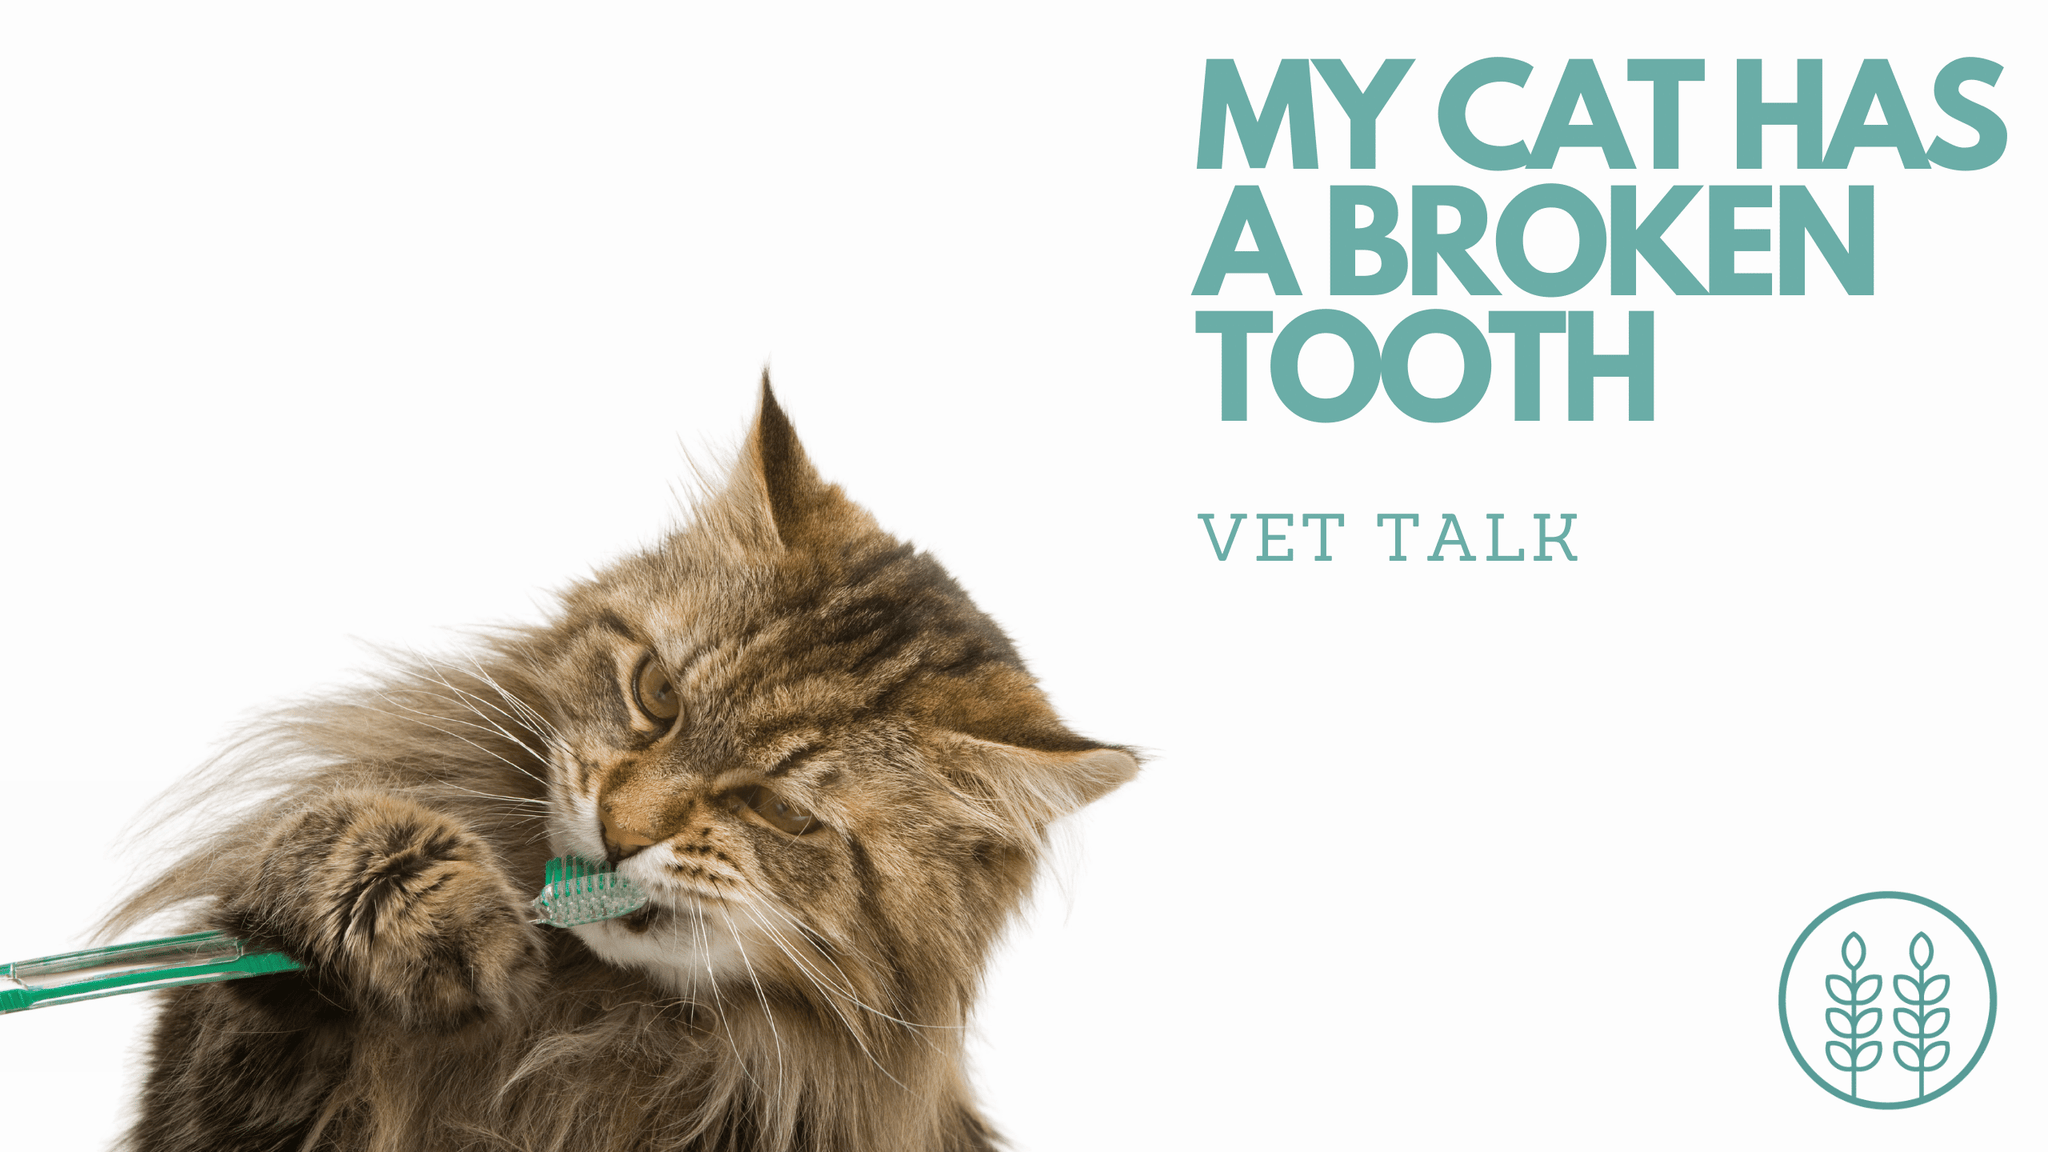 Q: My cat has a broken tooth but anesthesia scares me.